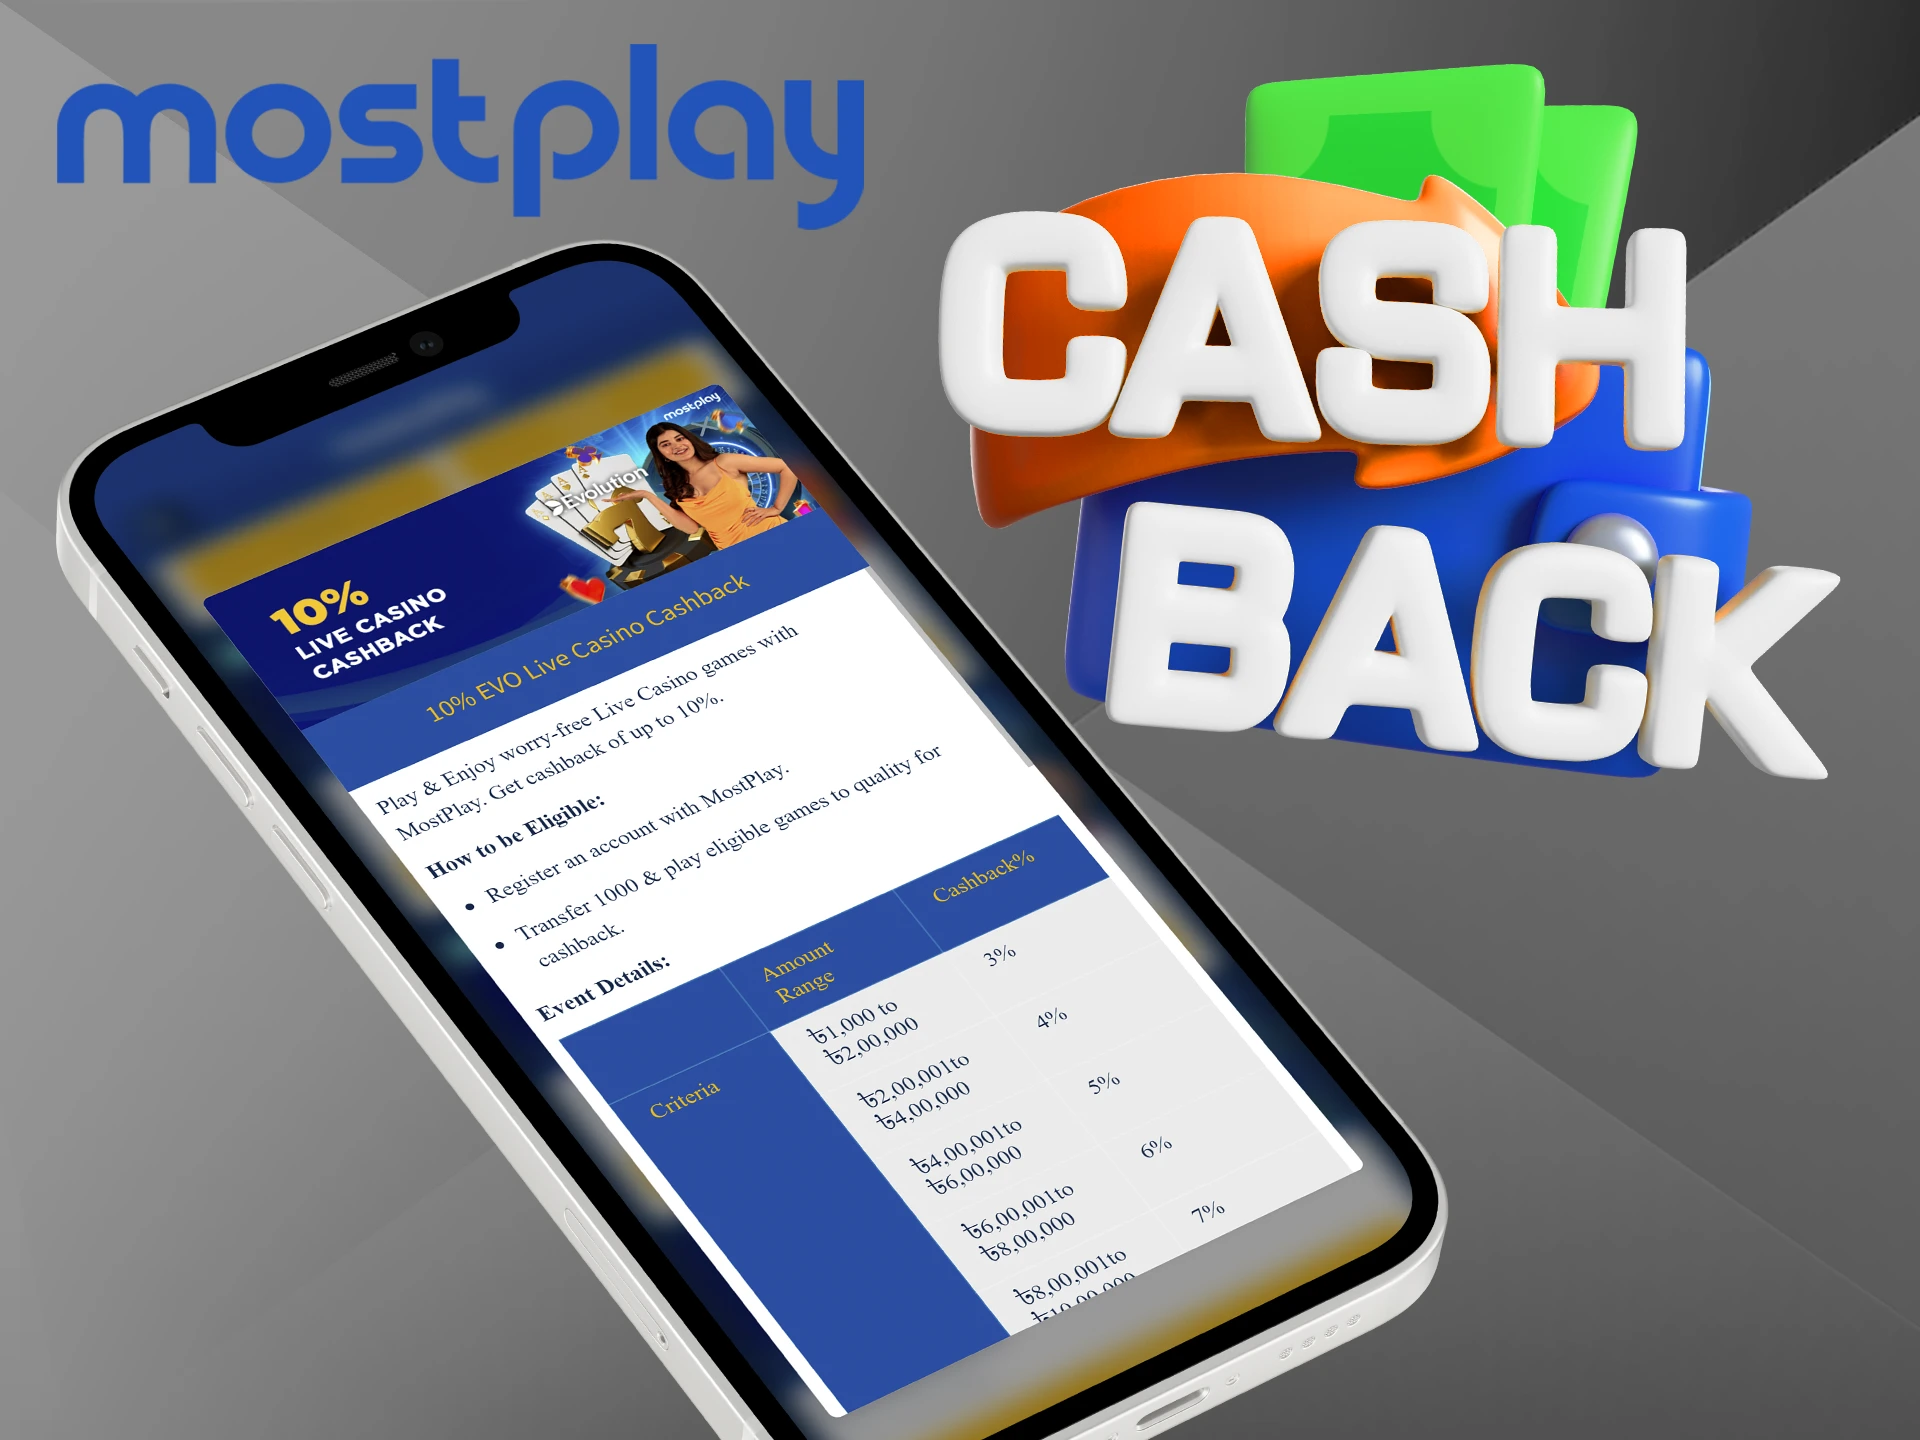 Get cashback on your losses at Mostplay.